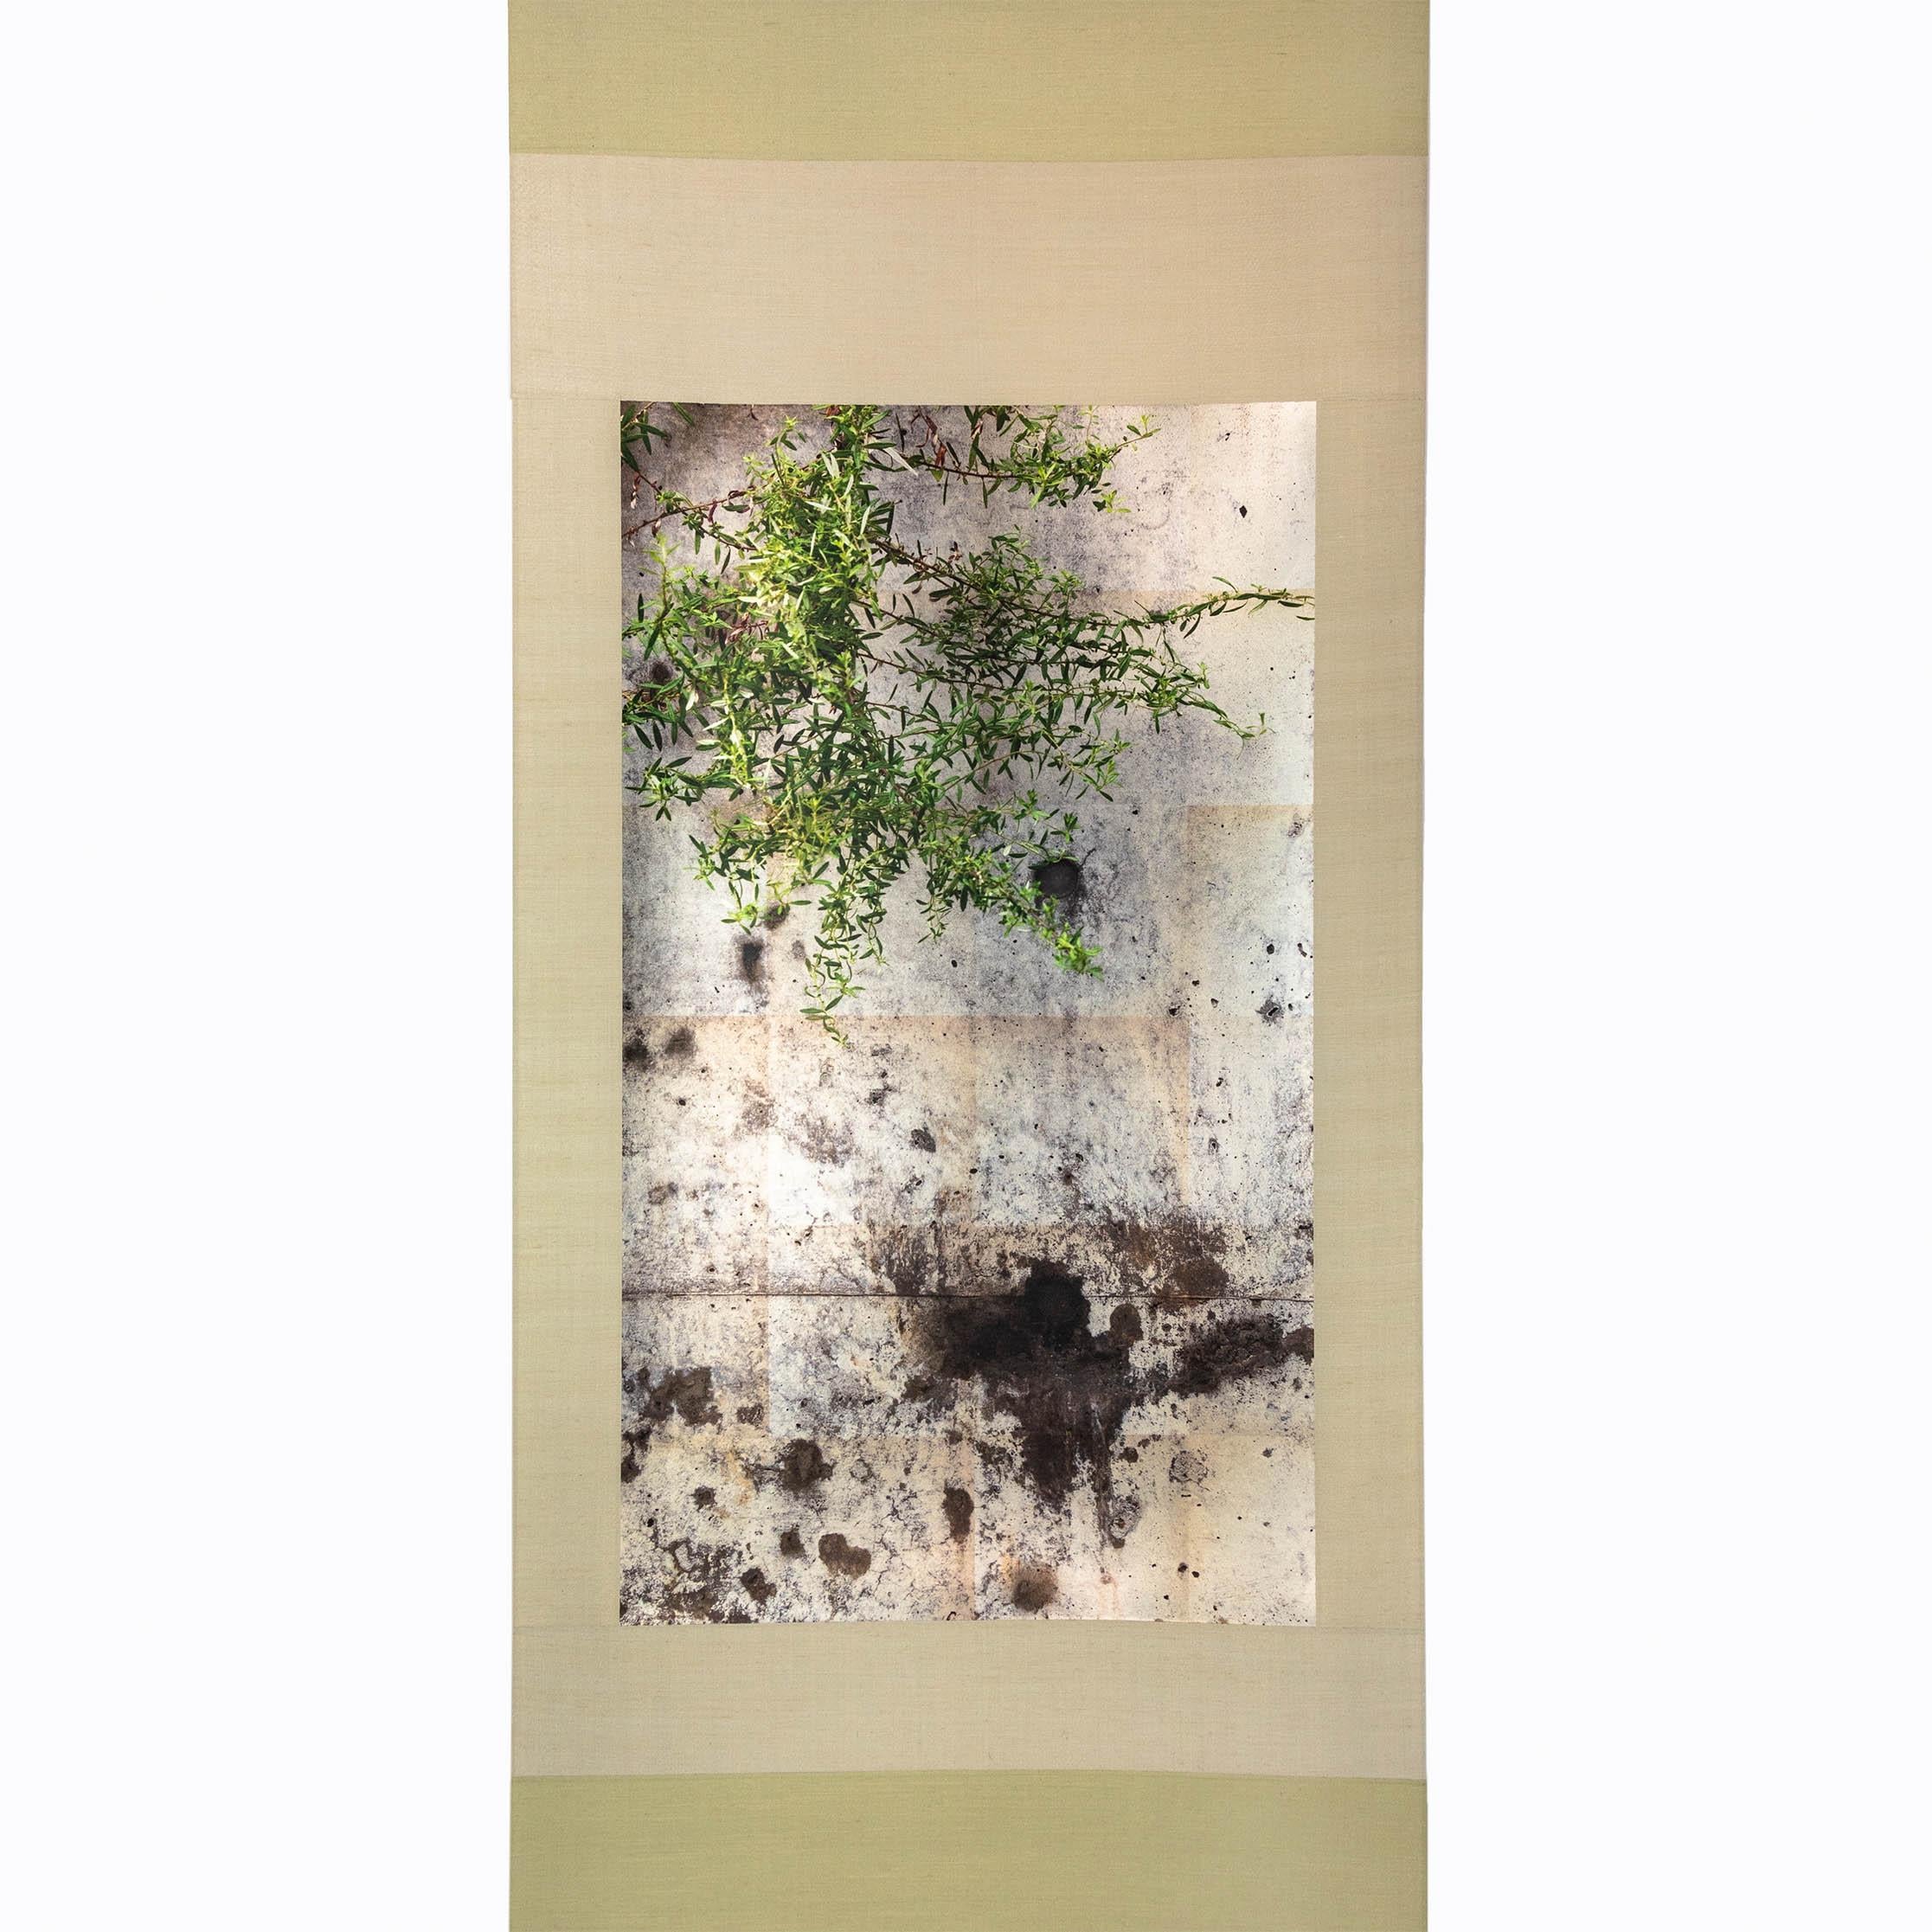 UV print of digital photograph on pewter leaf on paper, mounted in Japanese silk scroll

Kojun is an self-taught multimédia American artist born in 1977 based in Tokyo, Japan since 1999. Kojun project started in 2010 explores the experiences of